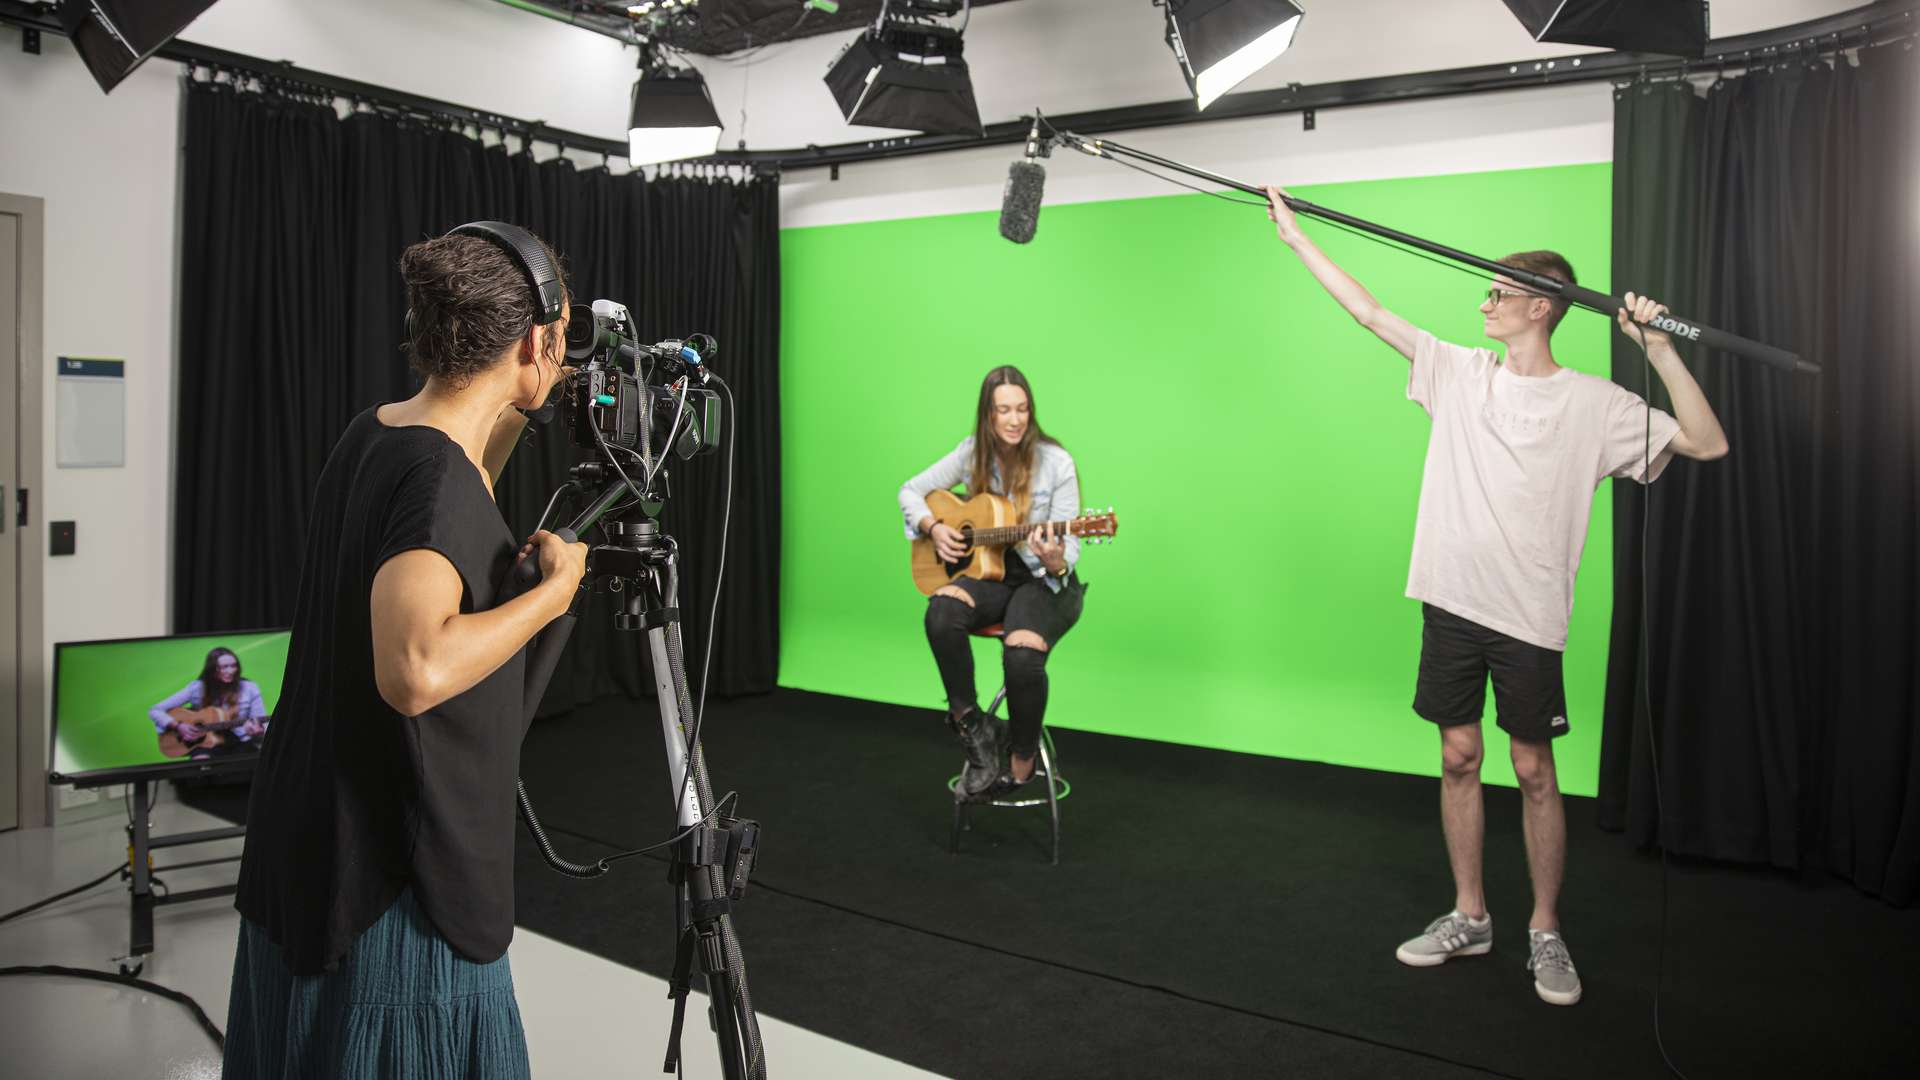 Digital Media students filming a guitarist in front of a green screen.